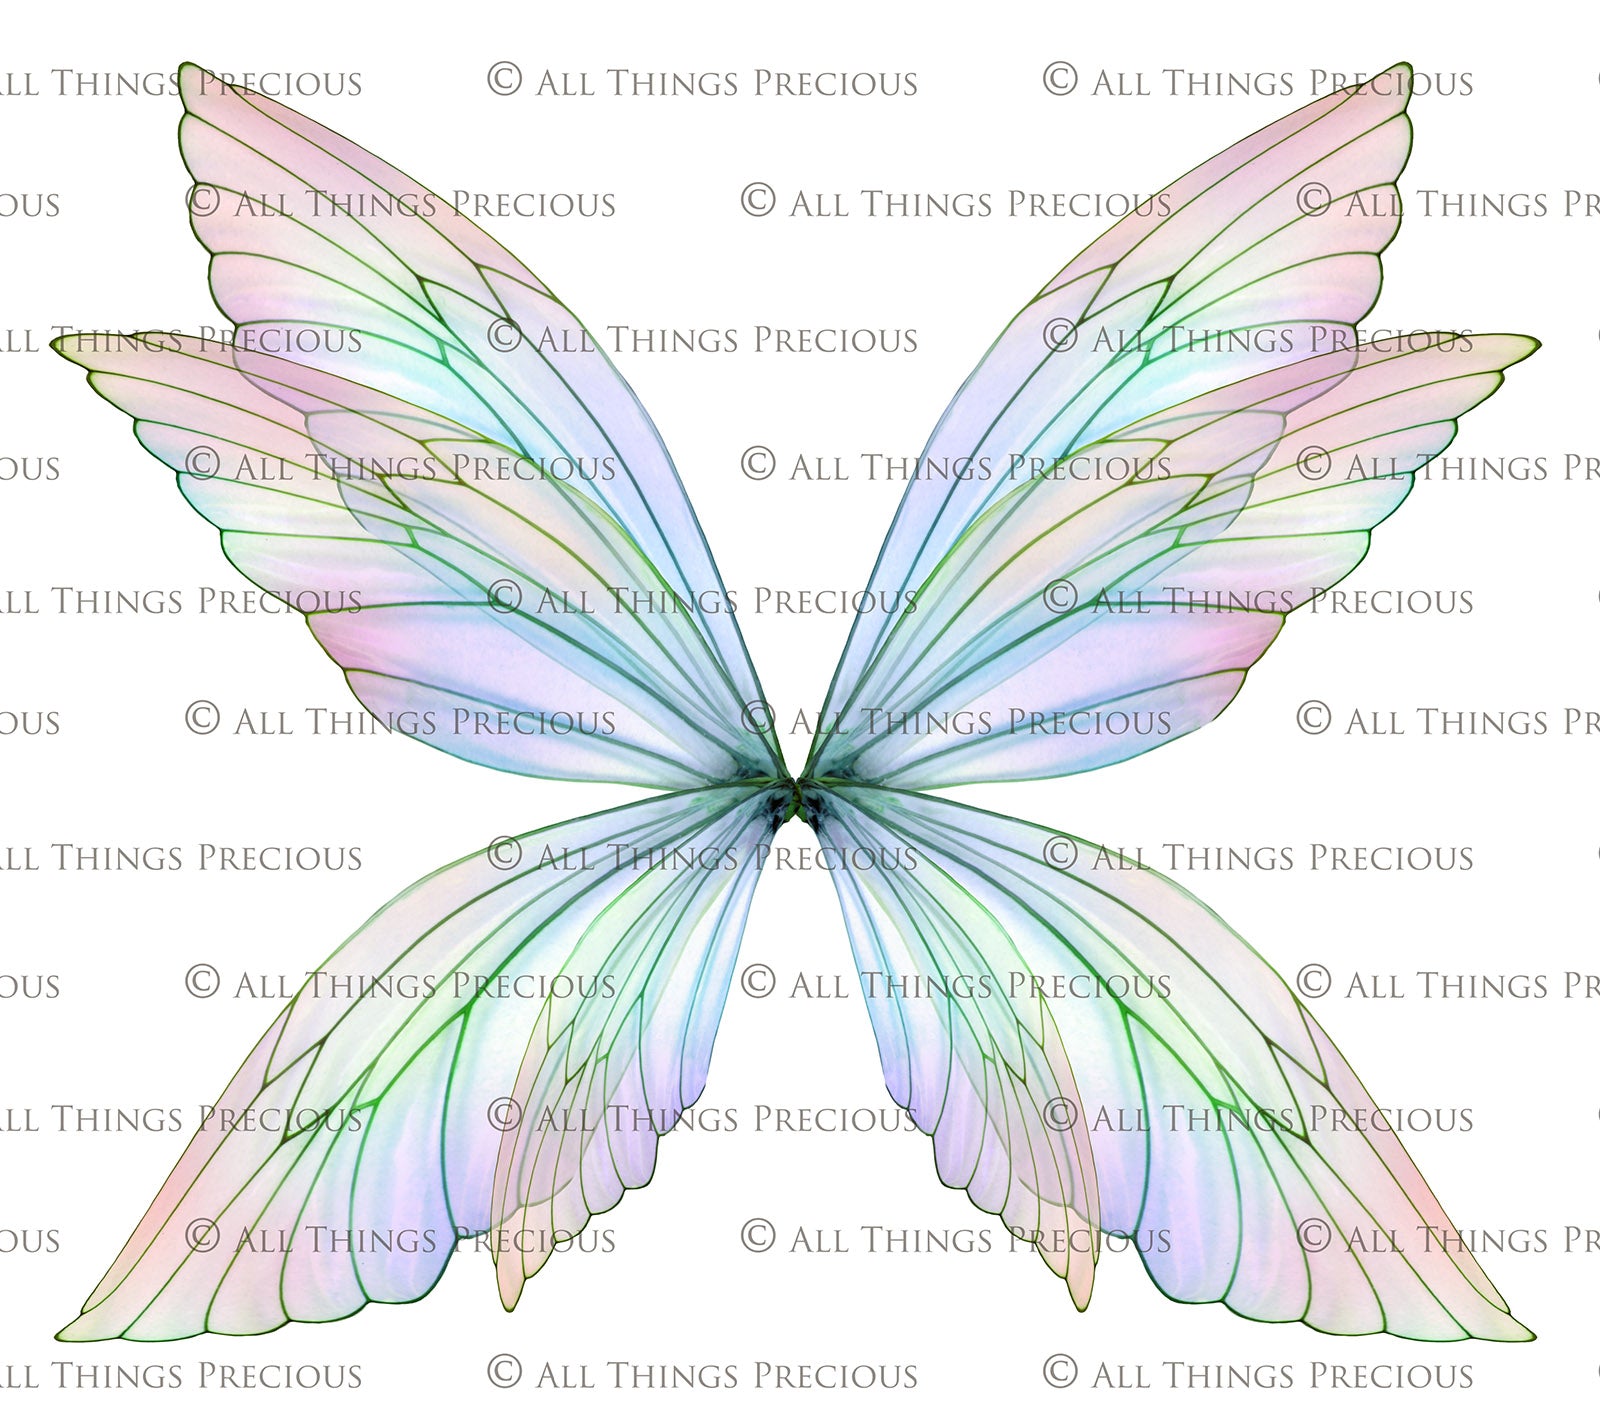 Digital Faery Wing Overlays. Png overlays for photoshop. Photography editing. High resolution, 300dpi fairy wings. Overlays for photography. Digital stock and resources. Graphic design. Fairy Photos. Colourful Fairy wings. Faerie Wings. ATP Textures. Overlays. Actions, Textures, Photo Resources, Photoshop. 